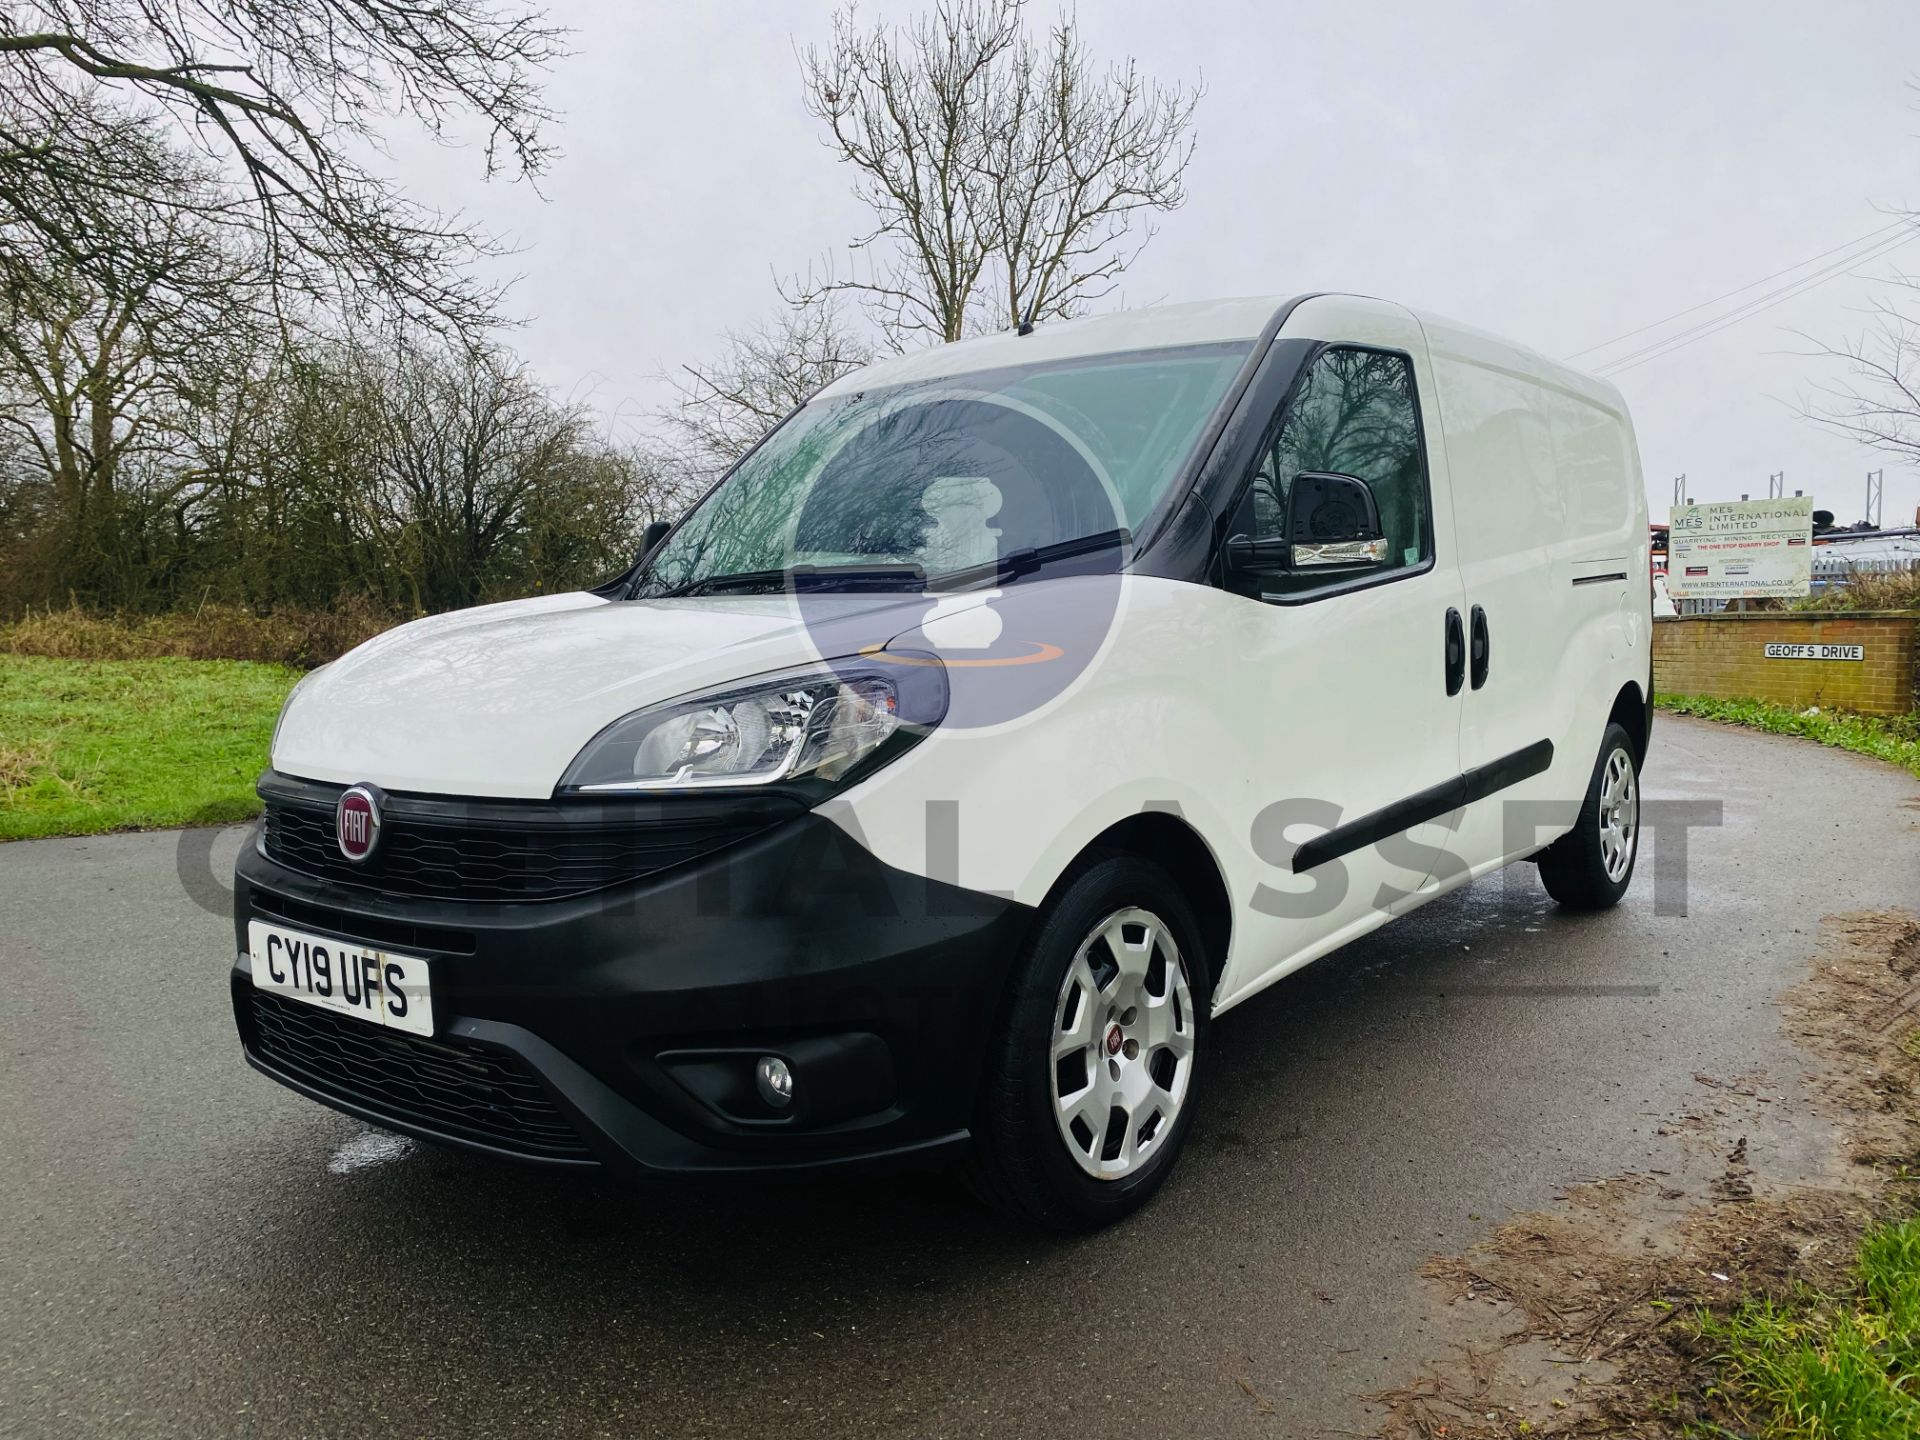 FIAT DOBLO 1.6 MULTIJET LWB "EURO 6" AIR CON - ONLY 46793 MILES! - 19 REG - (NEW SHAPE) - - Image 4 of 23